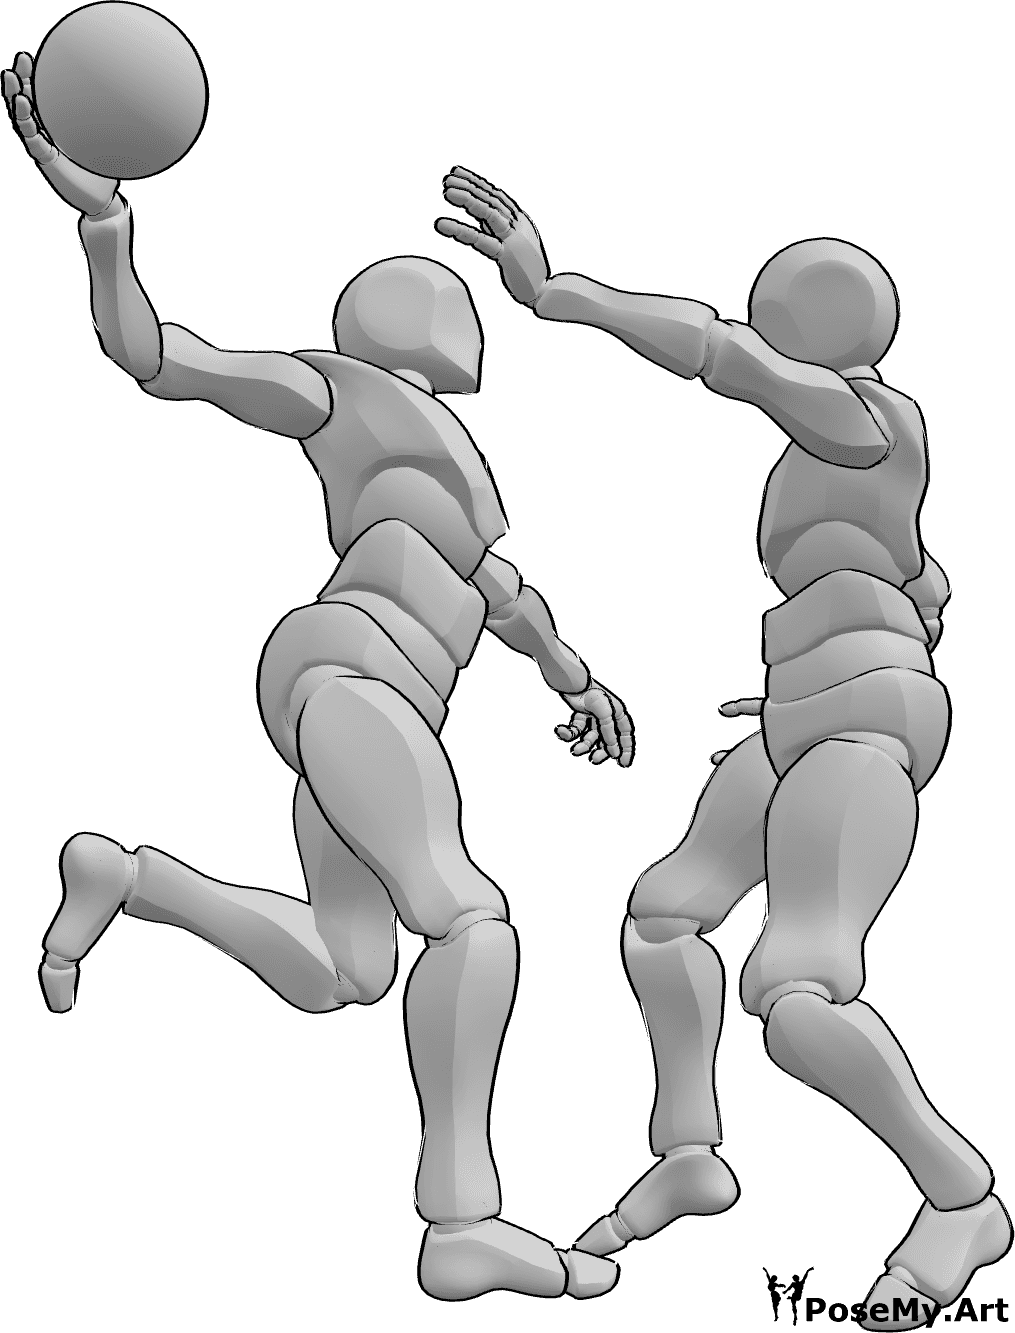 Pose Reference - Male players passing pose - Two males are playing handball, one of them is jumping and passing the ball